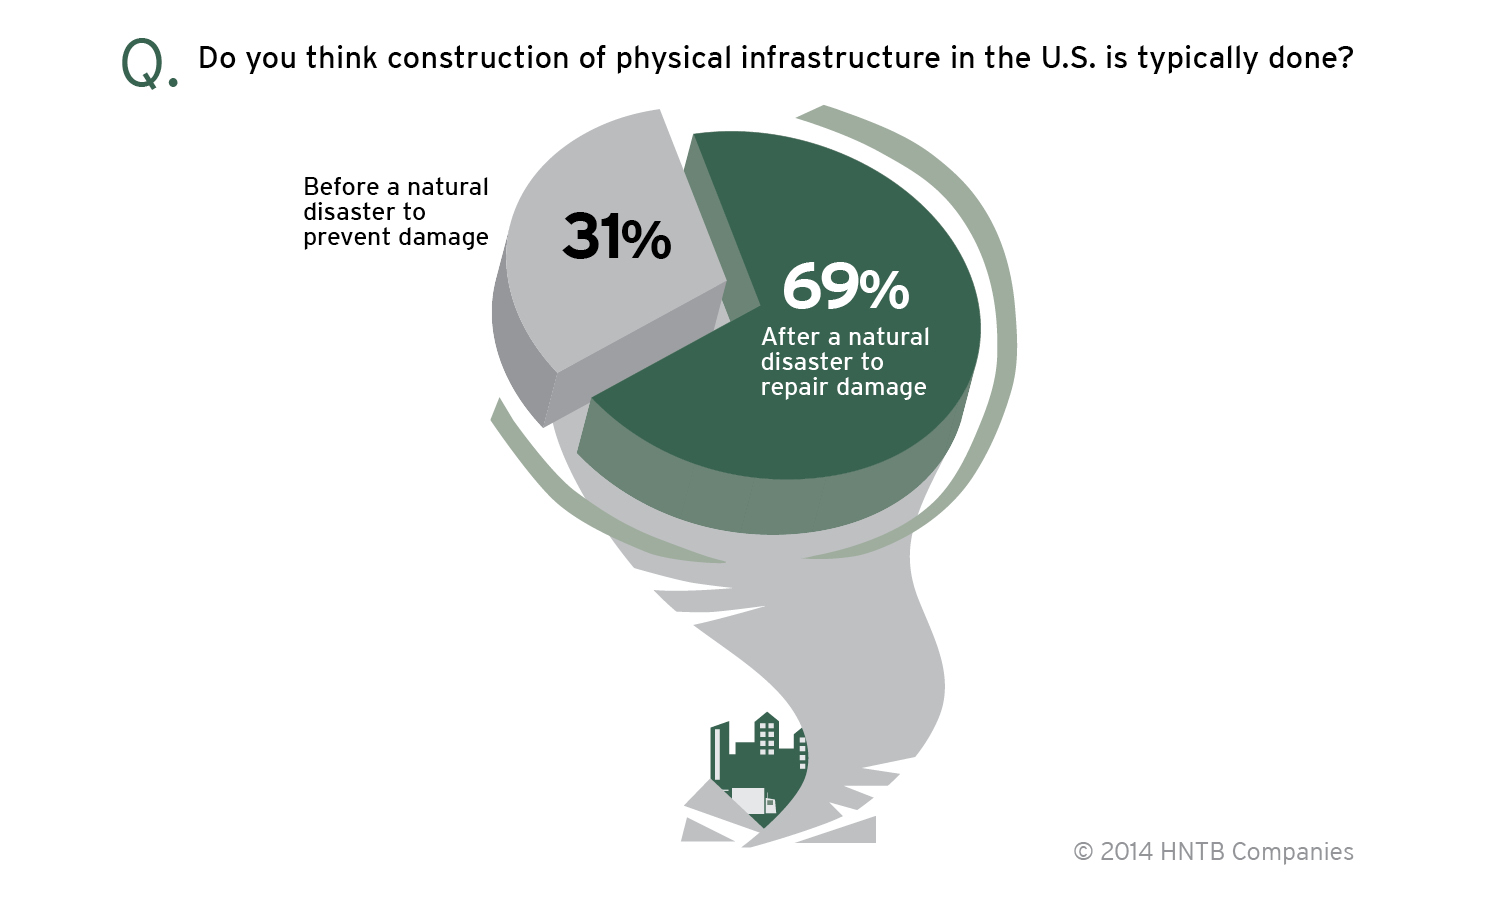 Nearly 7 in 10 (69 percent) Americans think construction is typically done after a natural disaster to repair damage rather than beforehand to prevent it.